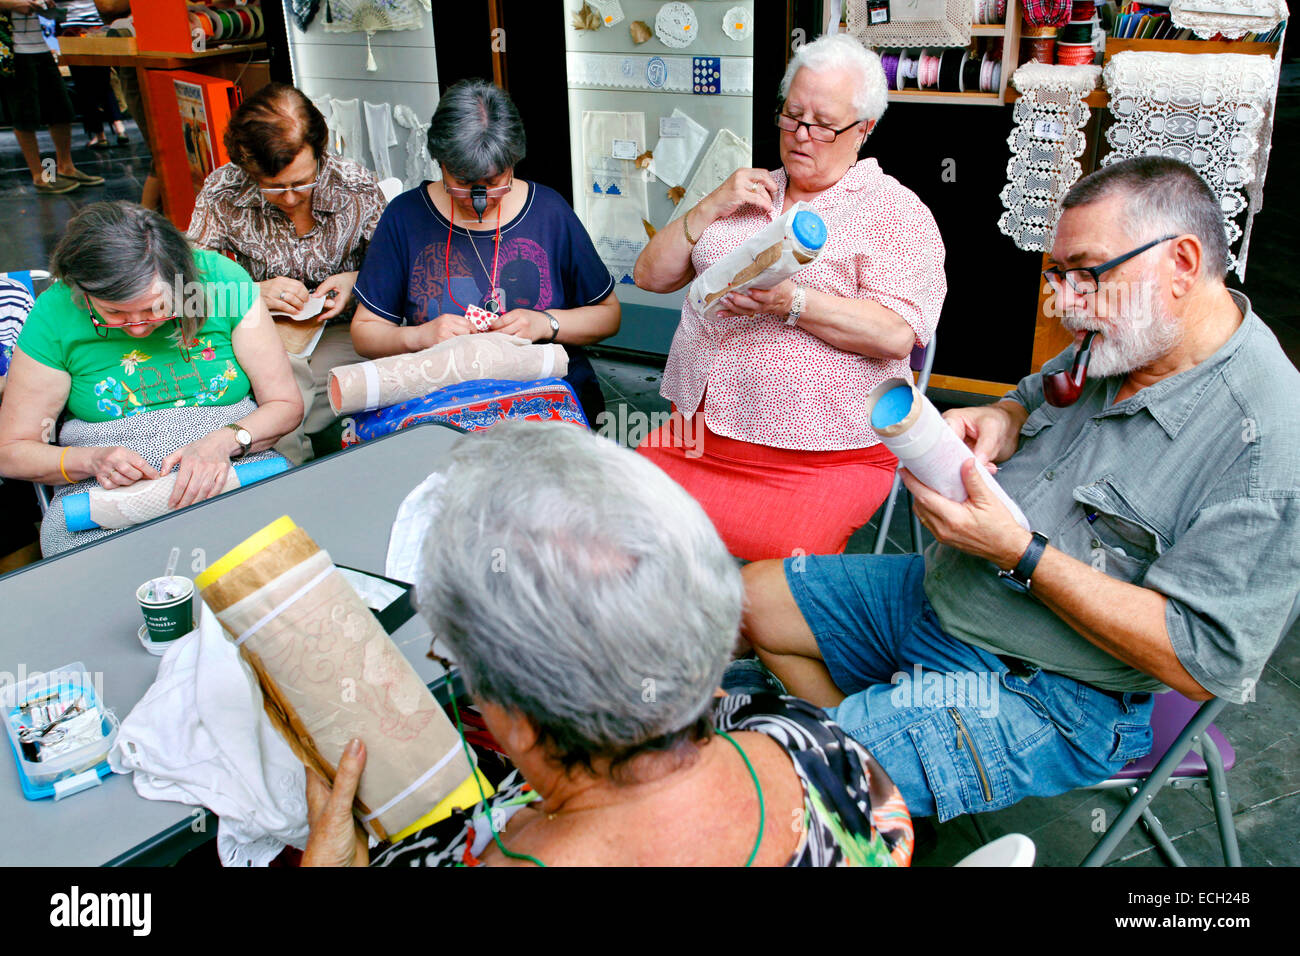 Elderly people busy with embroidery, Plaza Redonda, Round Square, el clot, the hole, Valencia, Spain Stock Photo